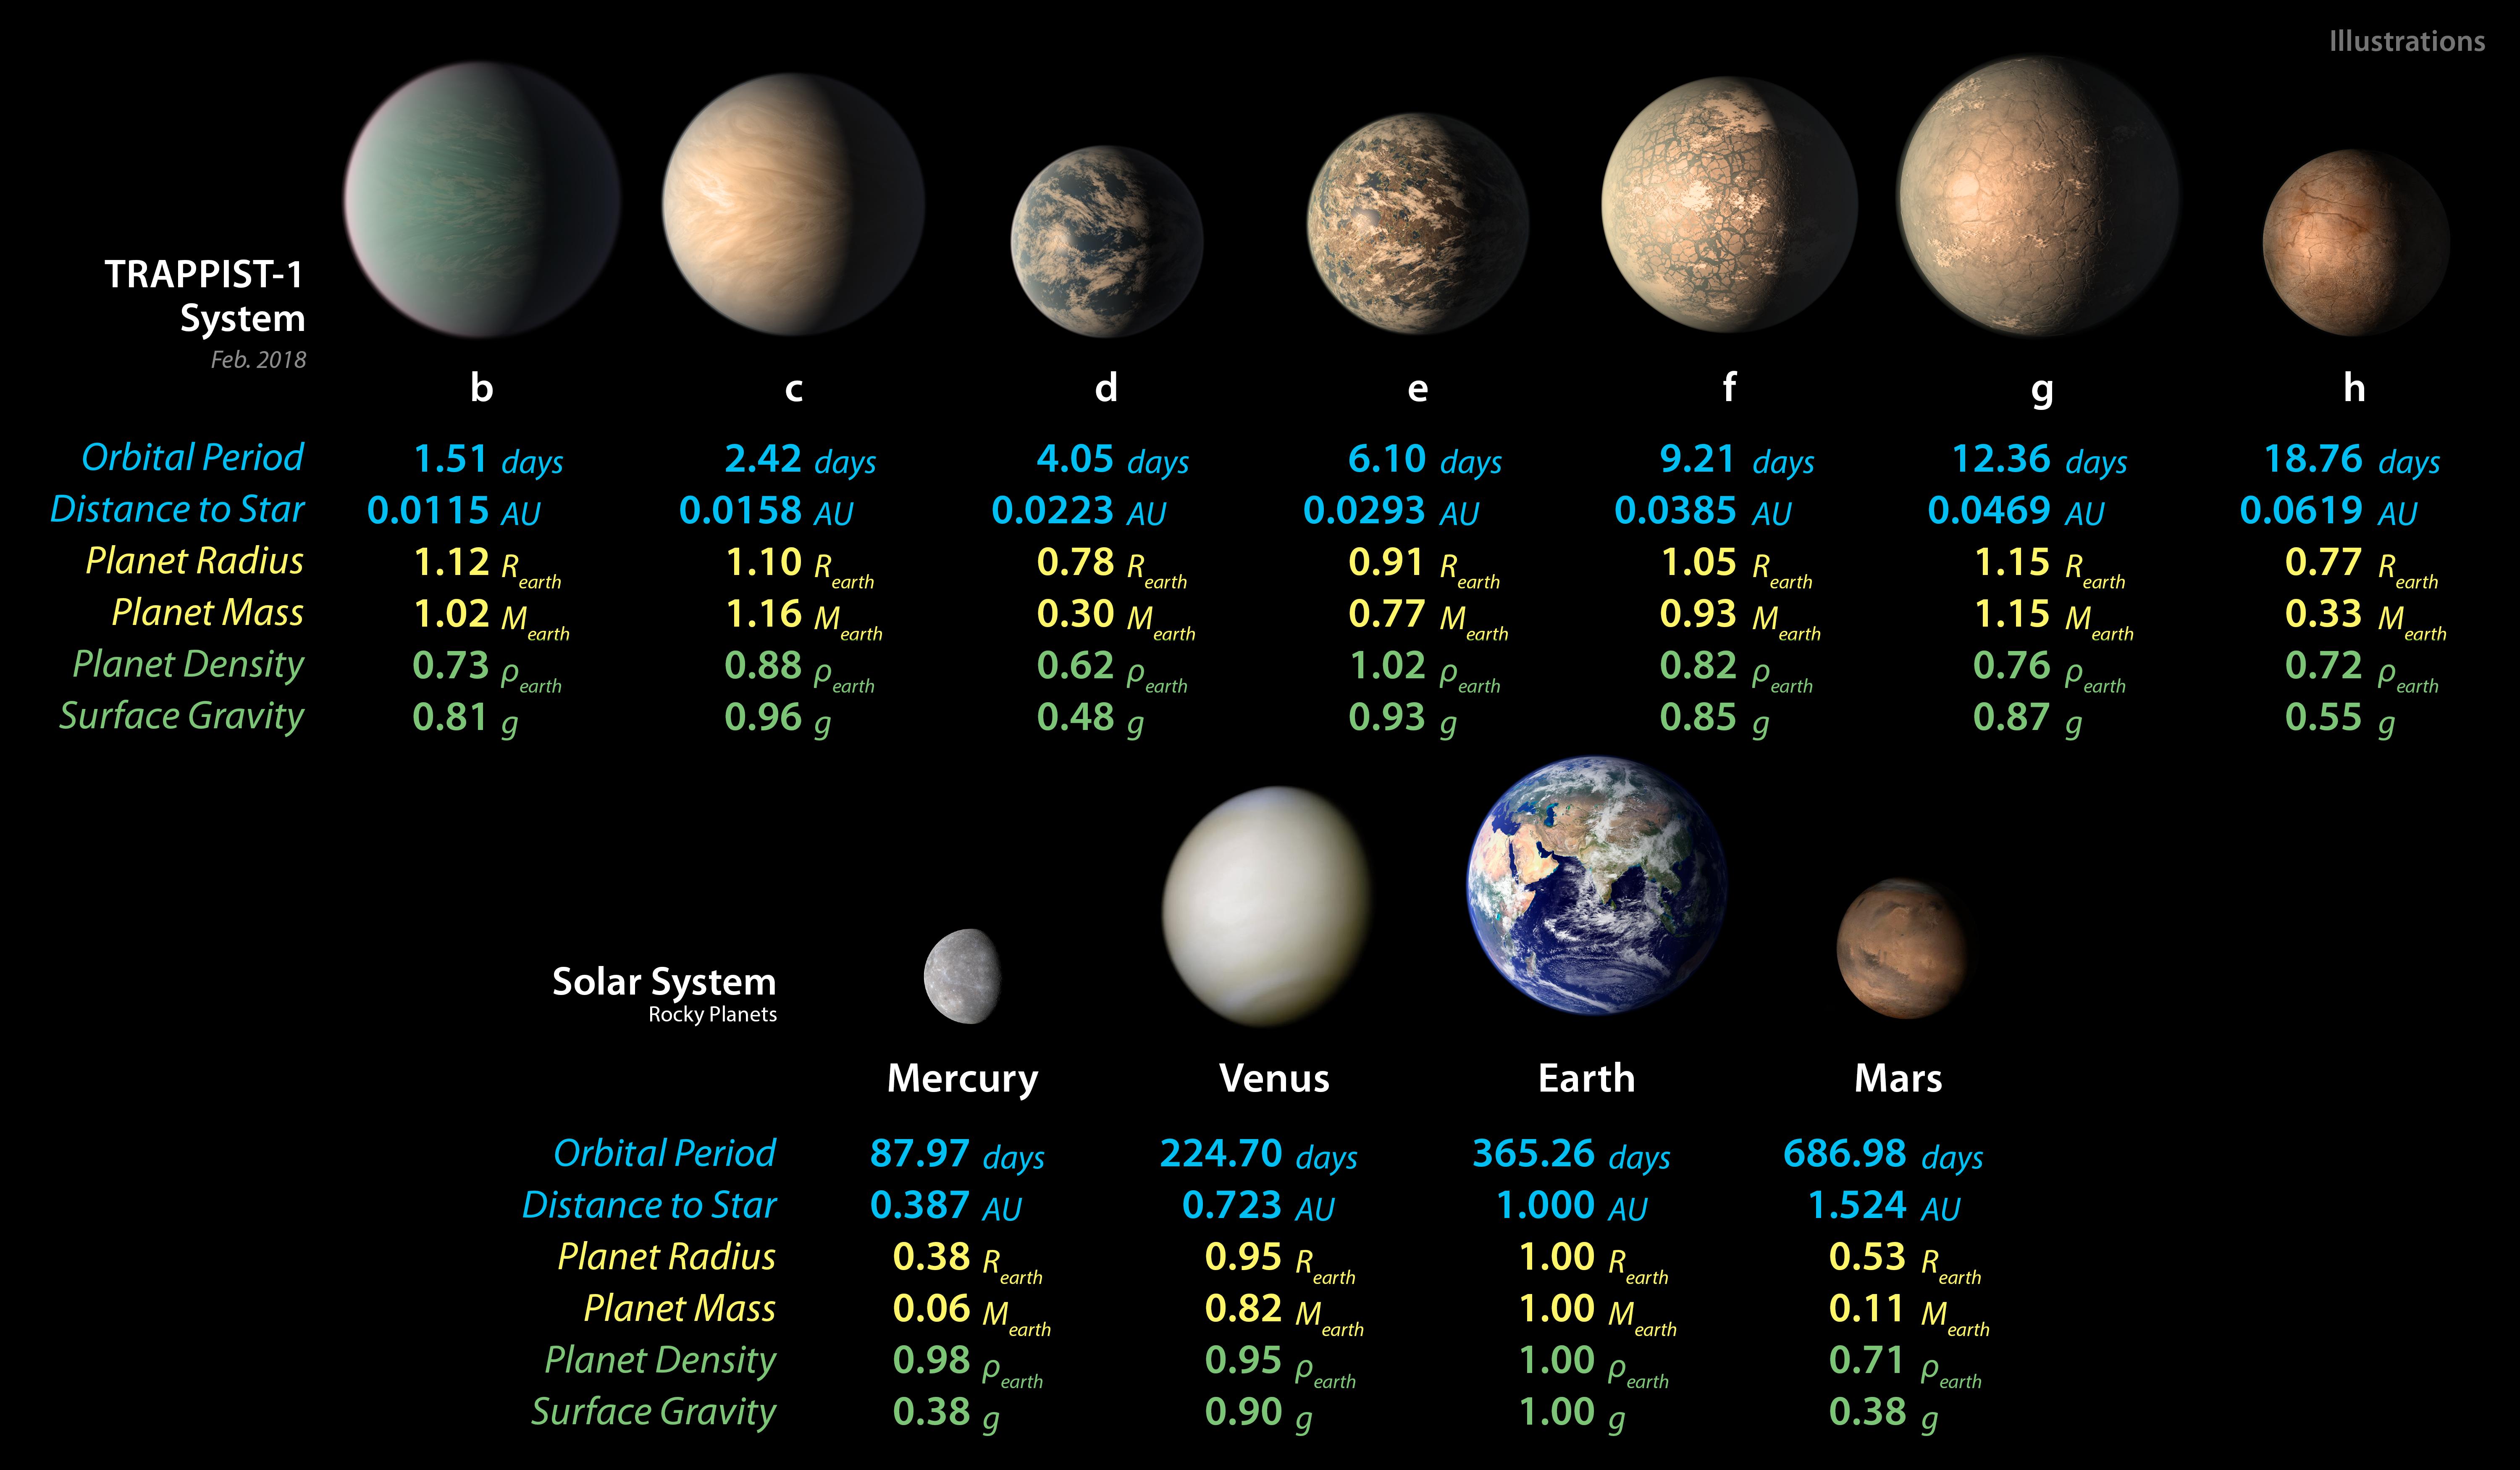 Seven rocky planets found around a star called TRAPPIST-1